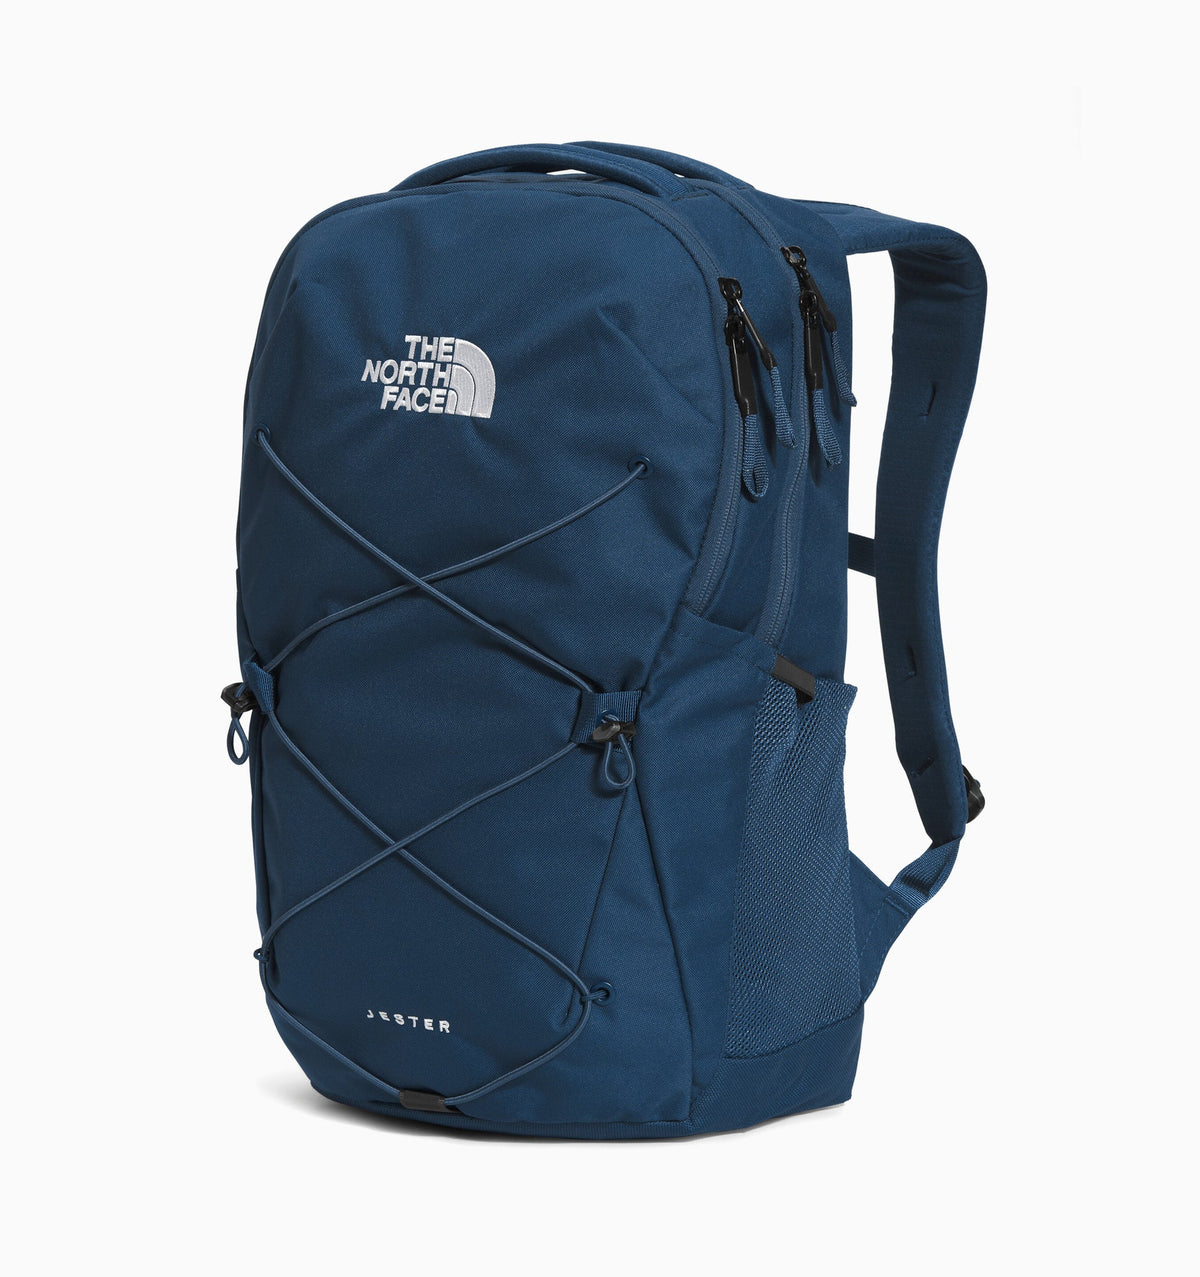 The North Face 16" Jester Laptop Backpack 28L